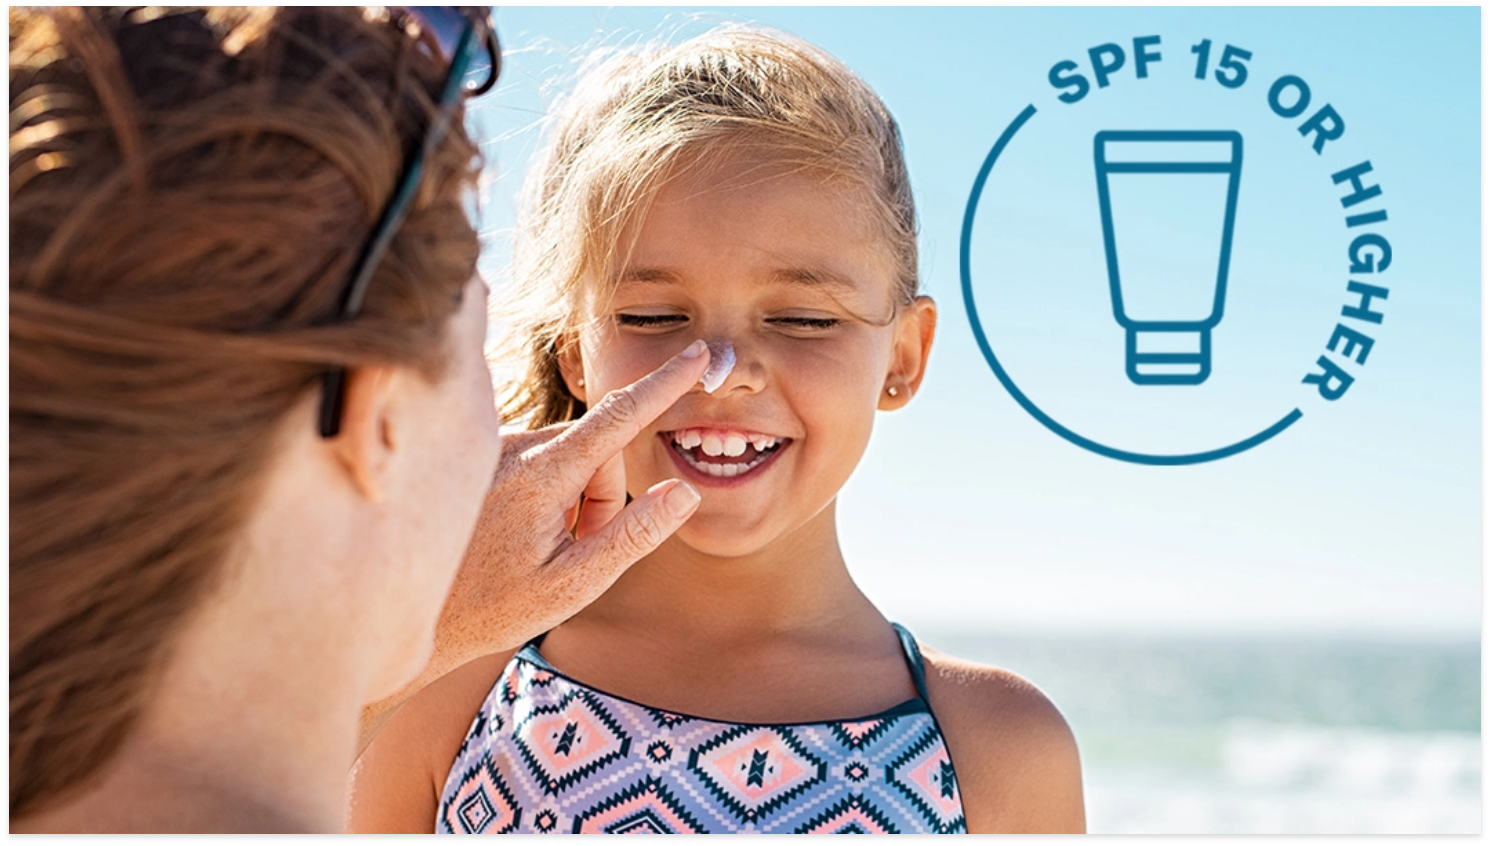 Woman playfully applying sunscreen to child's nose.